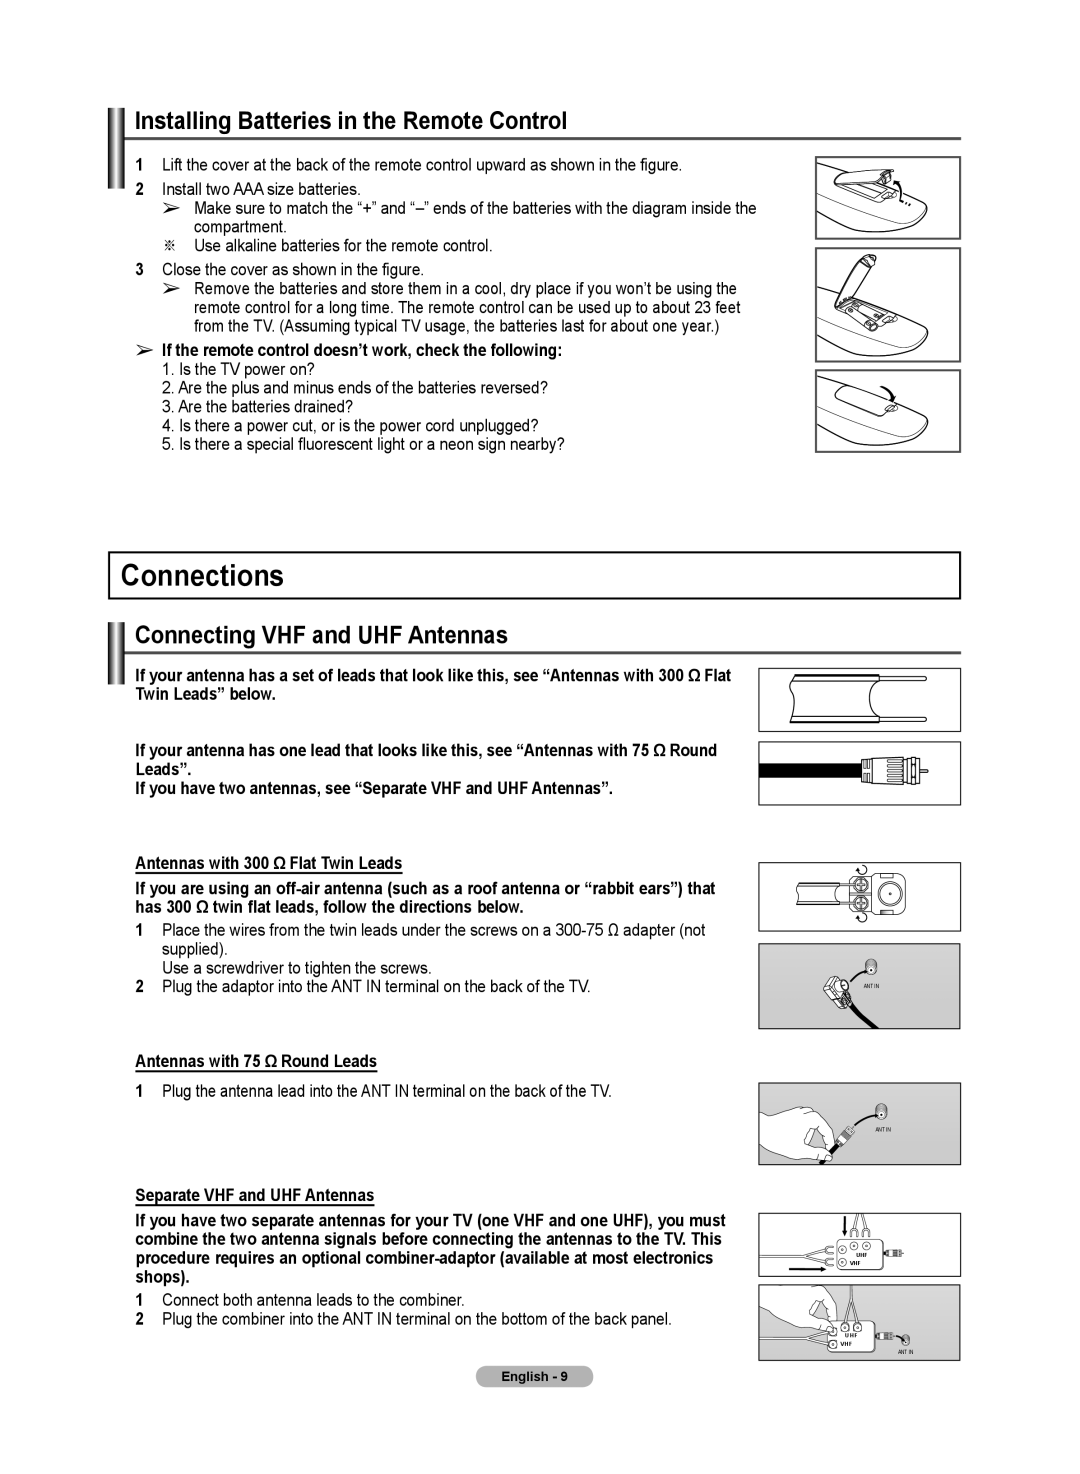 Samsung 510 user manual Connections, If the remote control doesn’t work, check the following, Twin Leads” below 